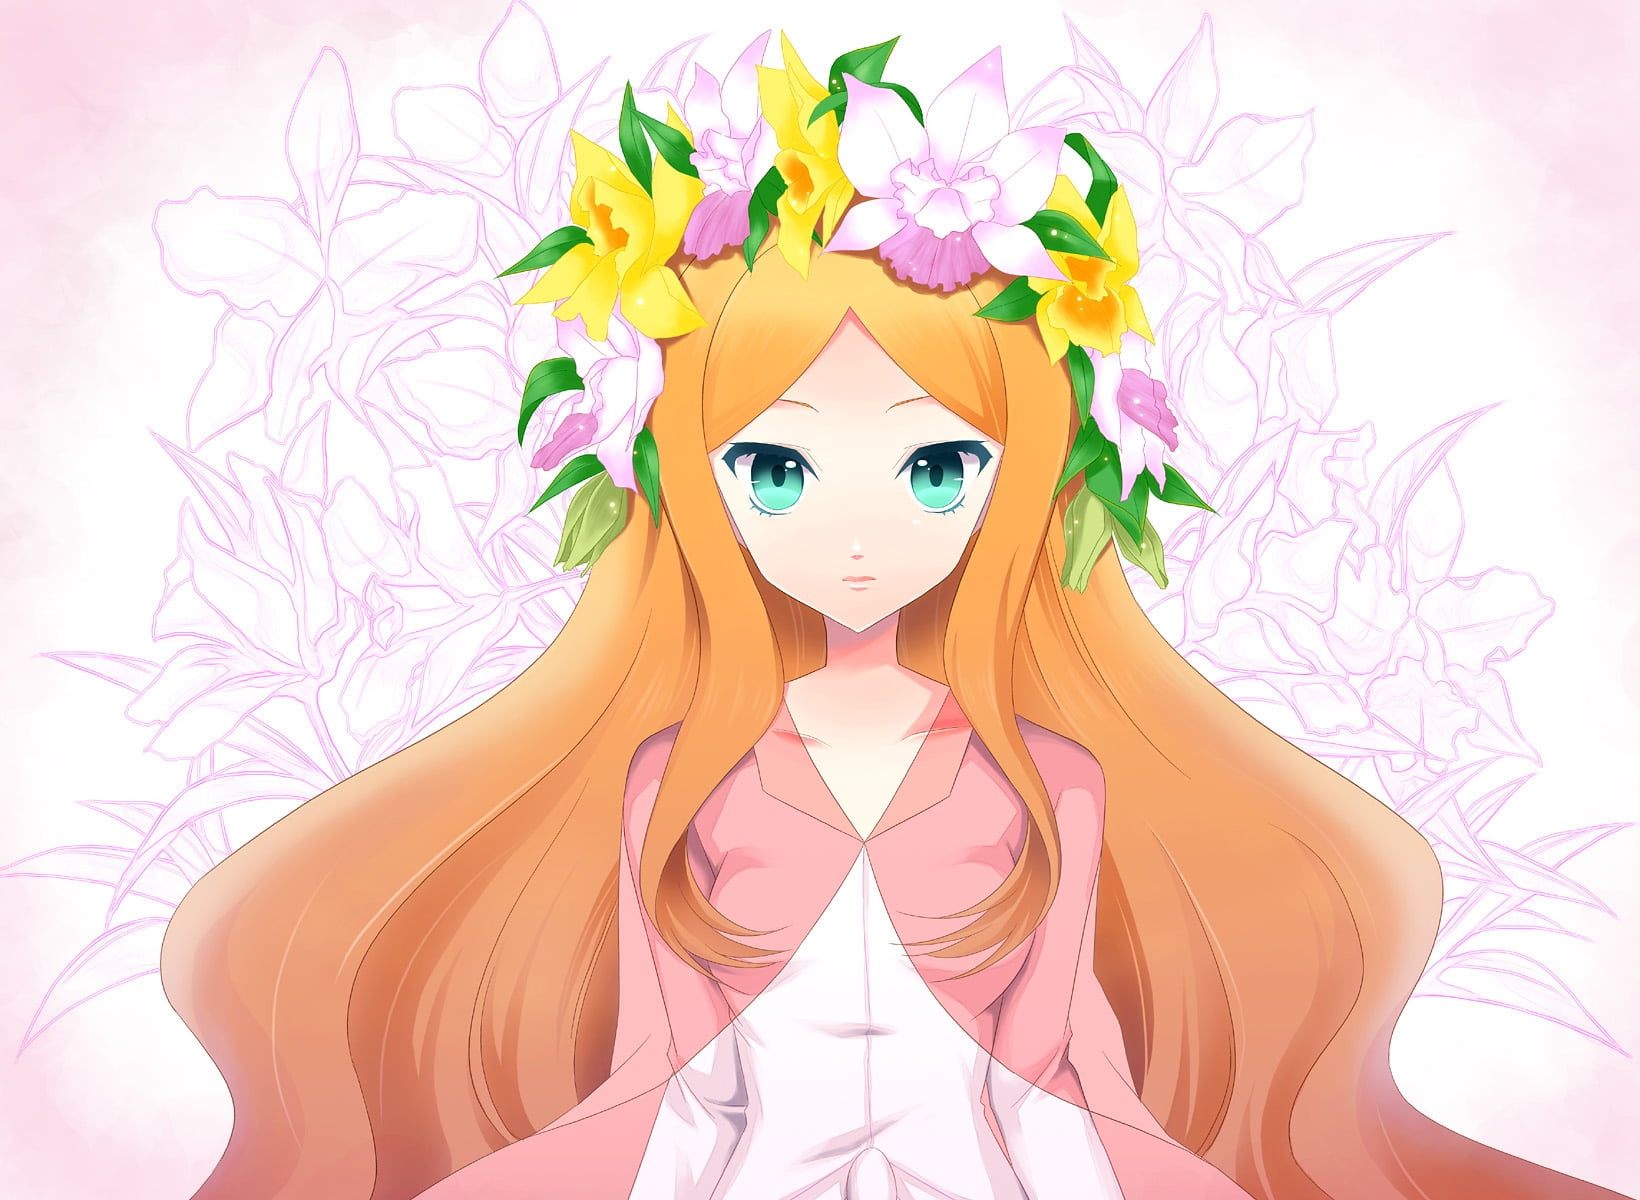 Orange Anime Girl Wallpaper The fanart flair will be used for fanart that wasn't made by you or doesn't line up with our definition of oc. orange anime girl wallpaper